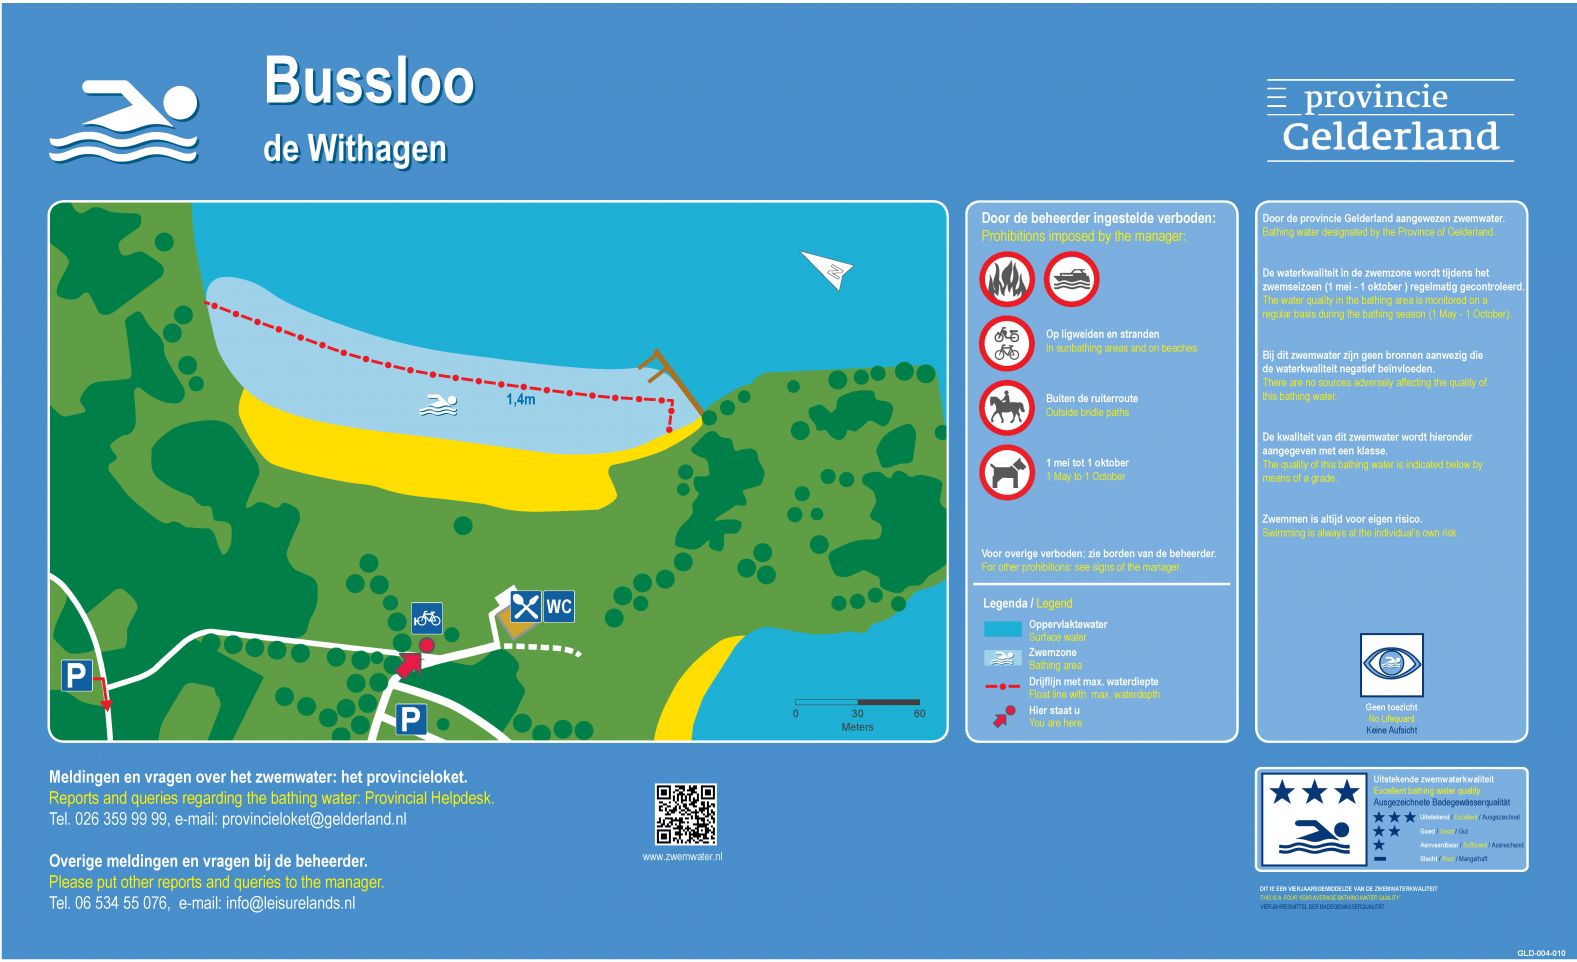 The information board at the swimming location Bussloo De Withagen